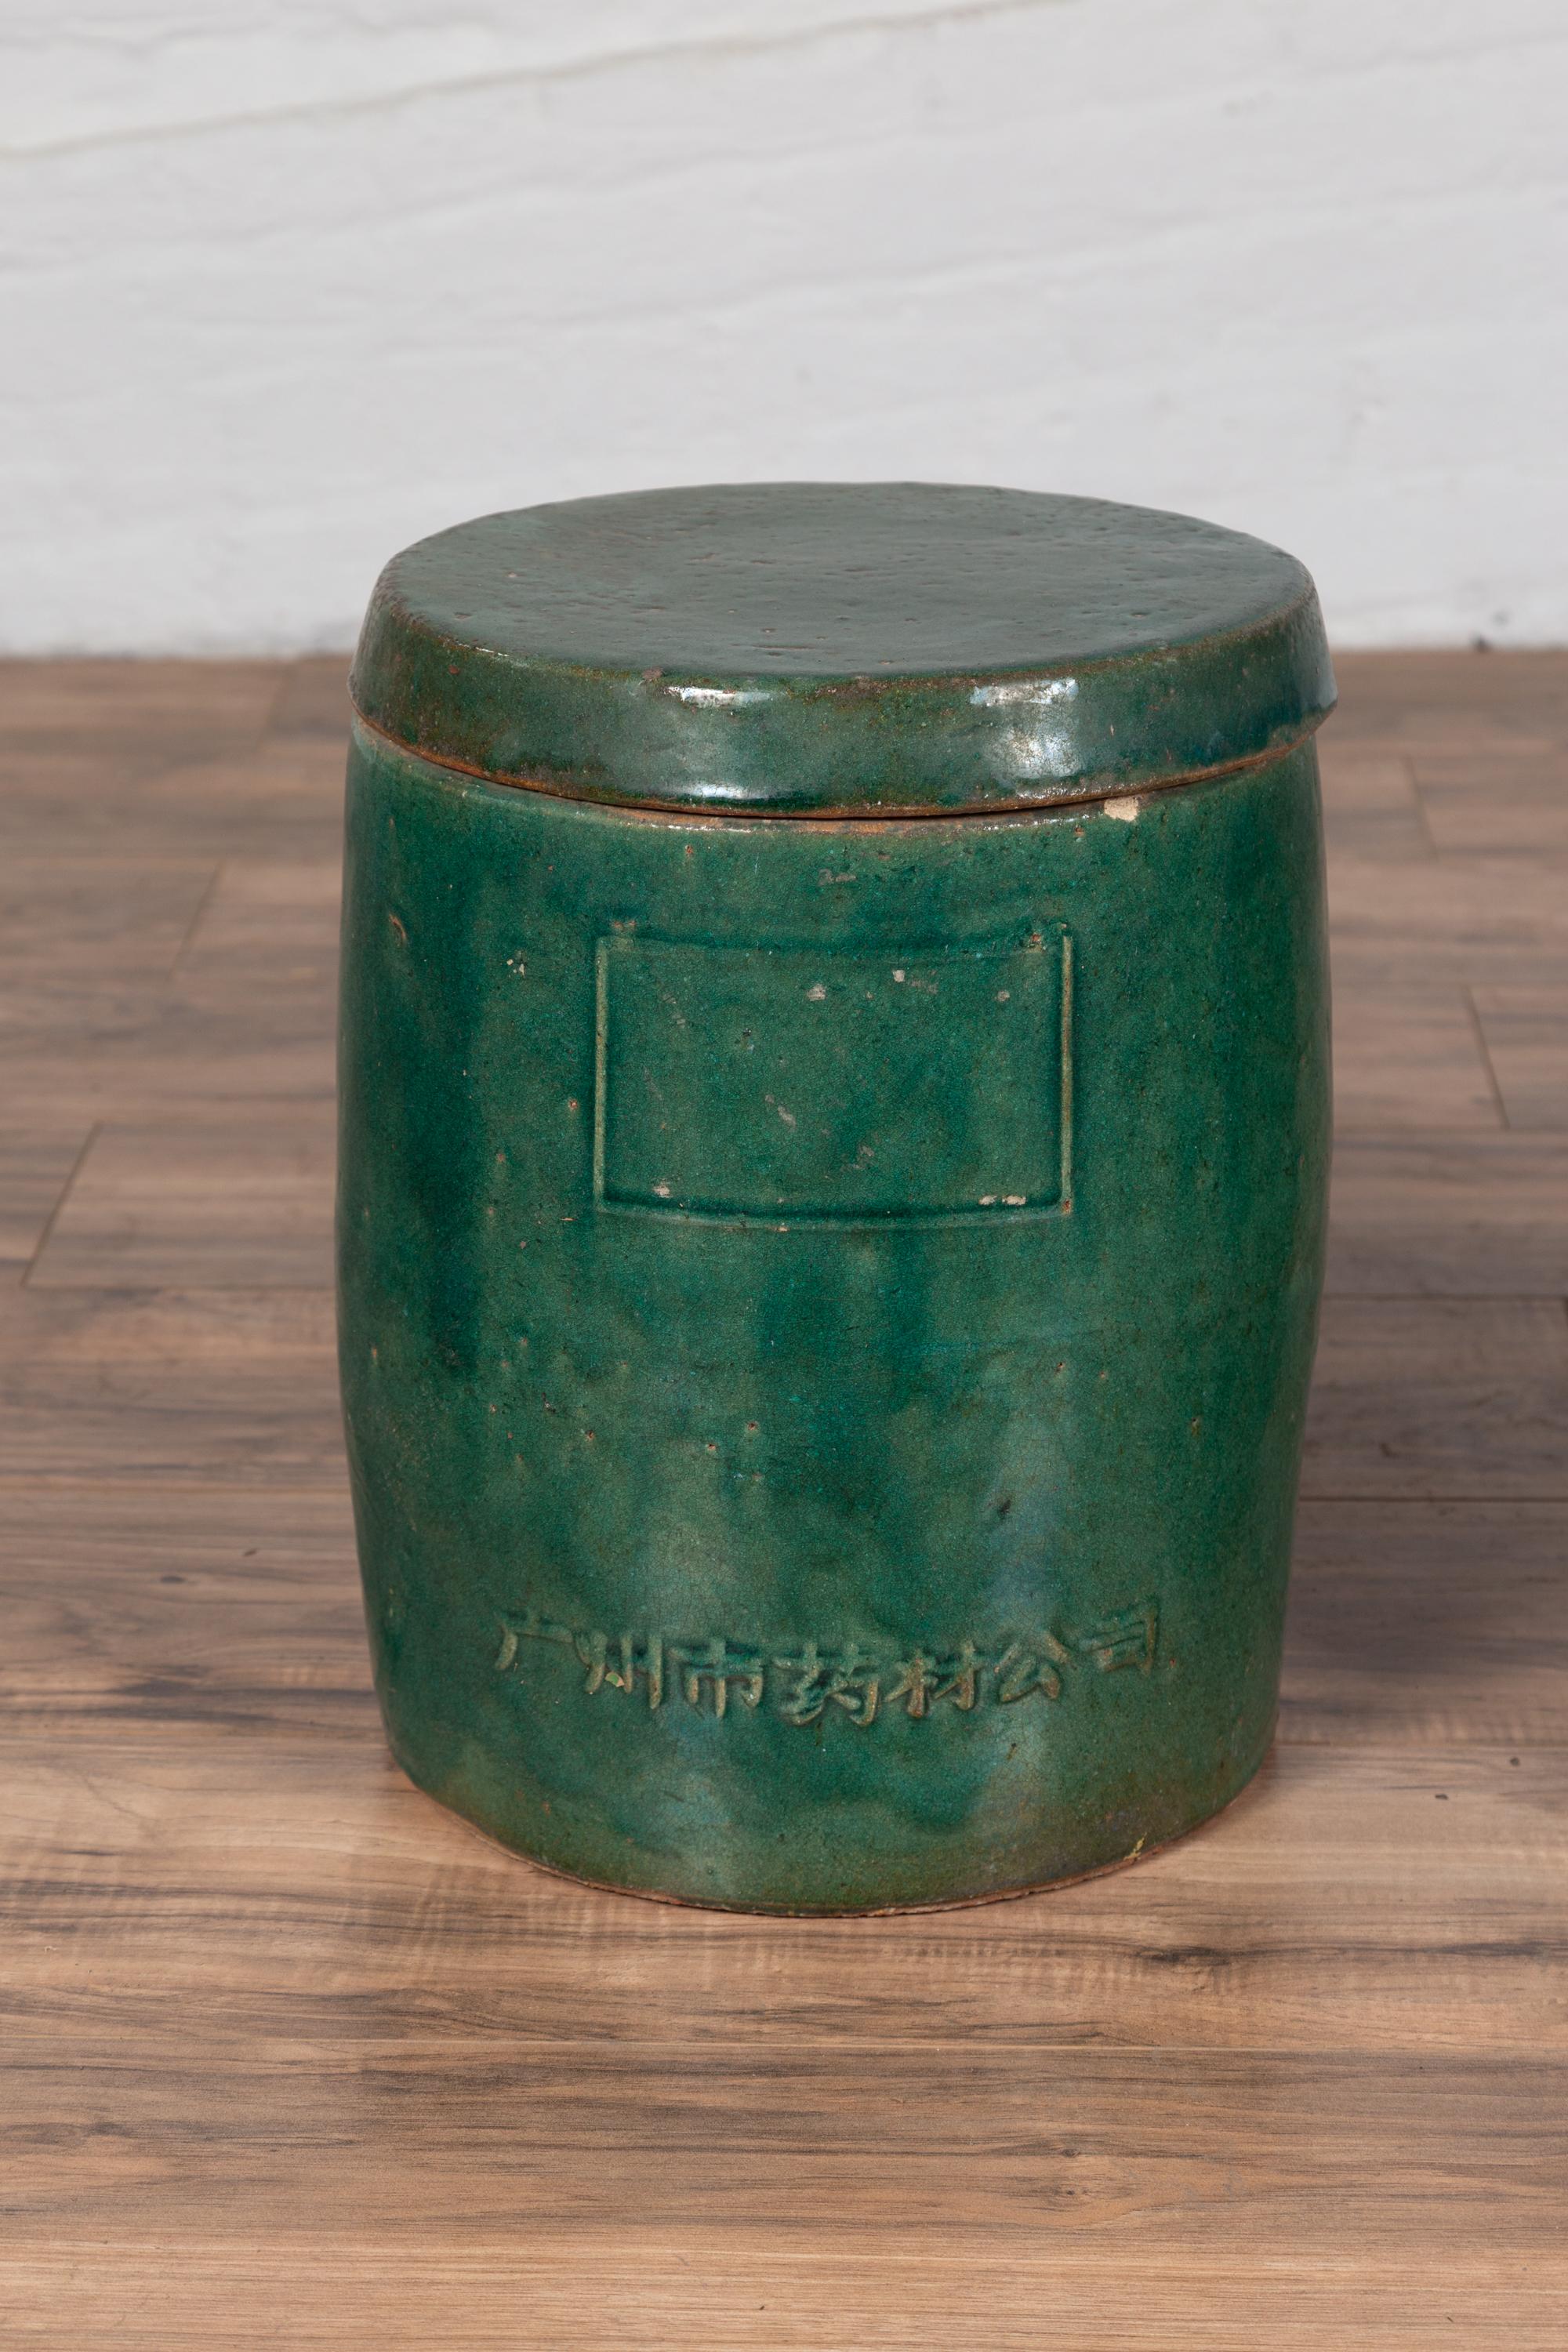 20th Century Pair of Antique Chinese Green Glazed Ceramic Lidded Jars from the Hunan Province